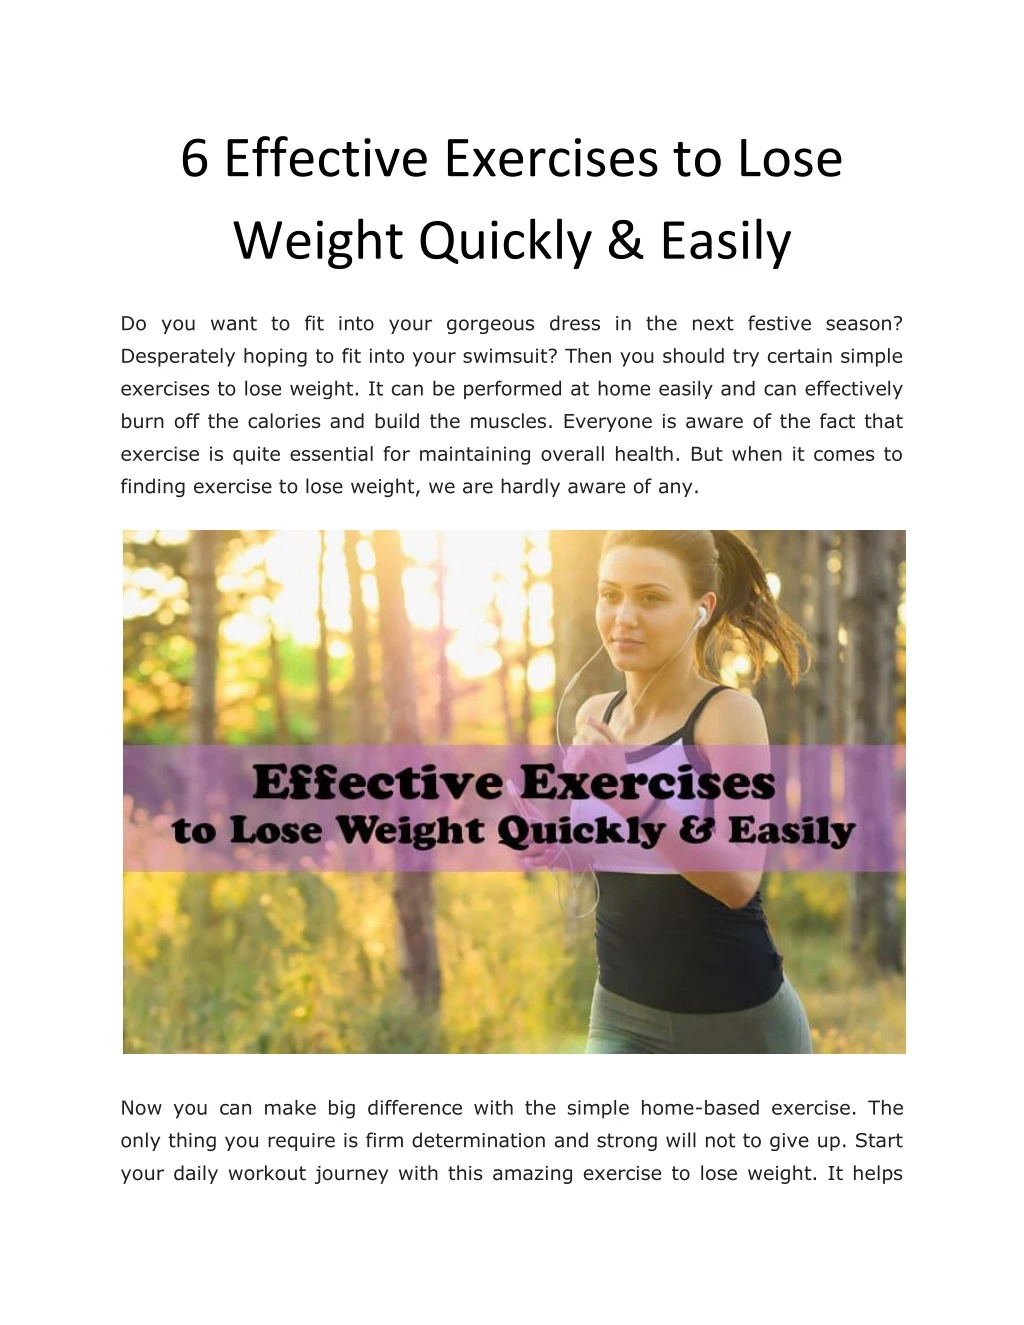 6 effective exercises to lose weight quickly